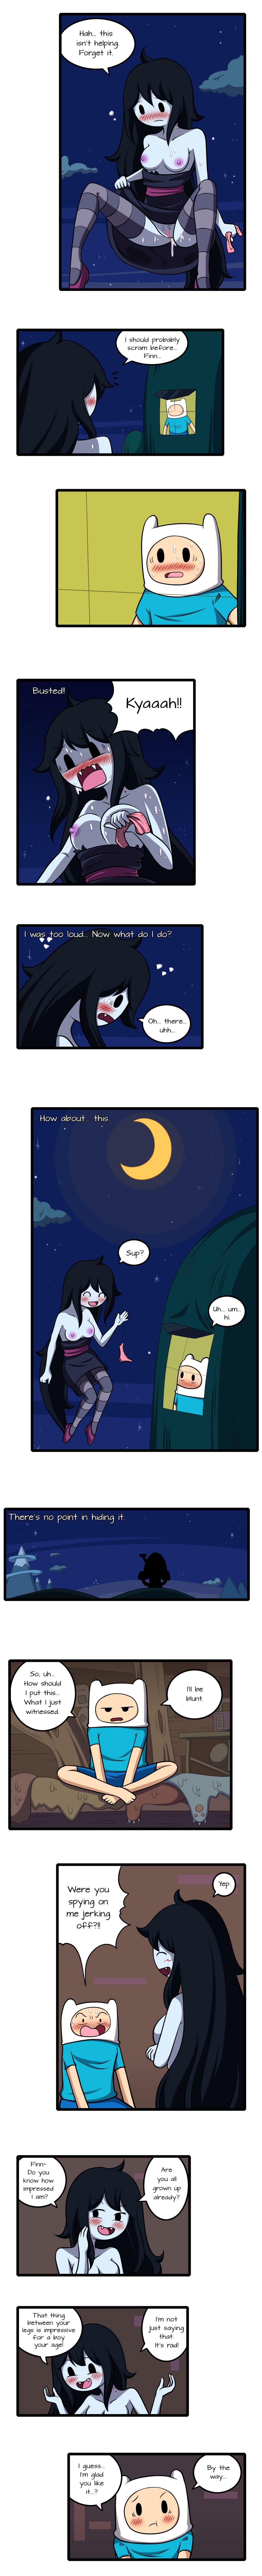 Asstomouth Adult Time 4 - Adventure time Twerking - Page 6